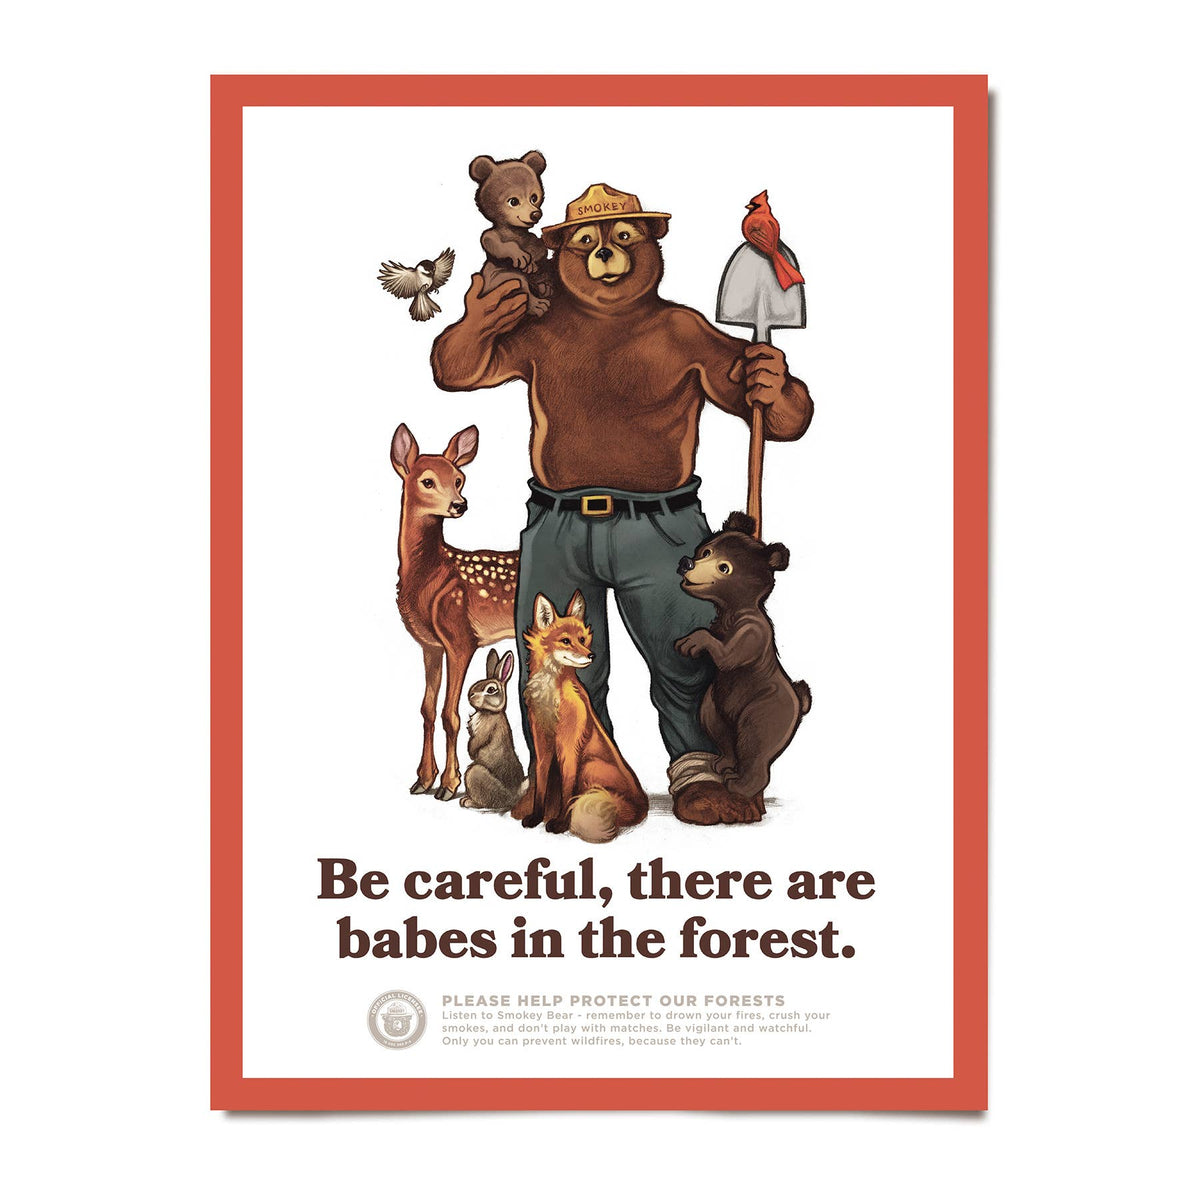 Babes in the Forest Poster